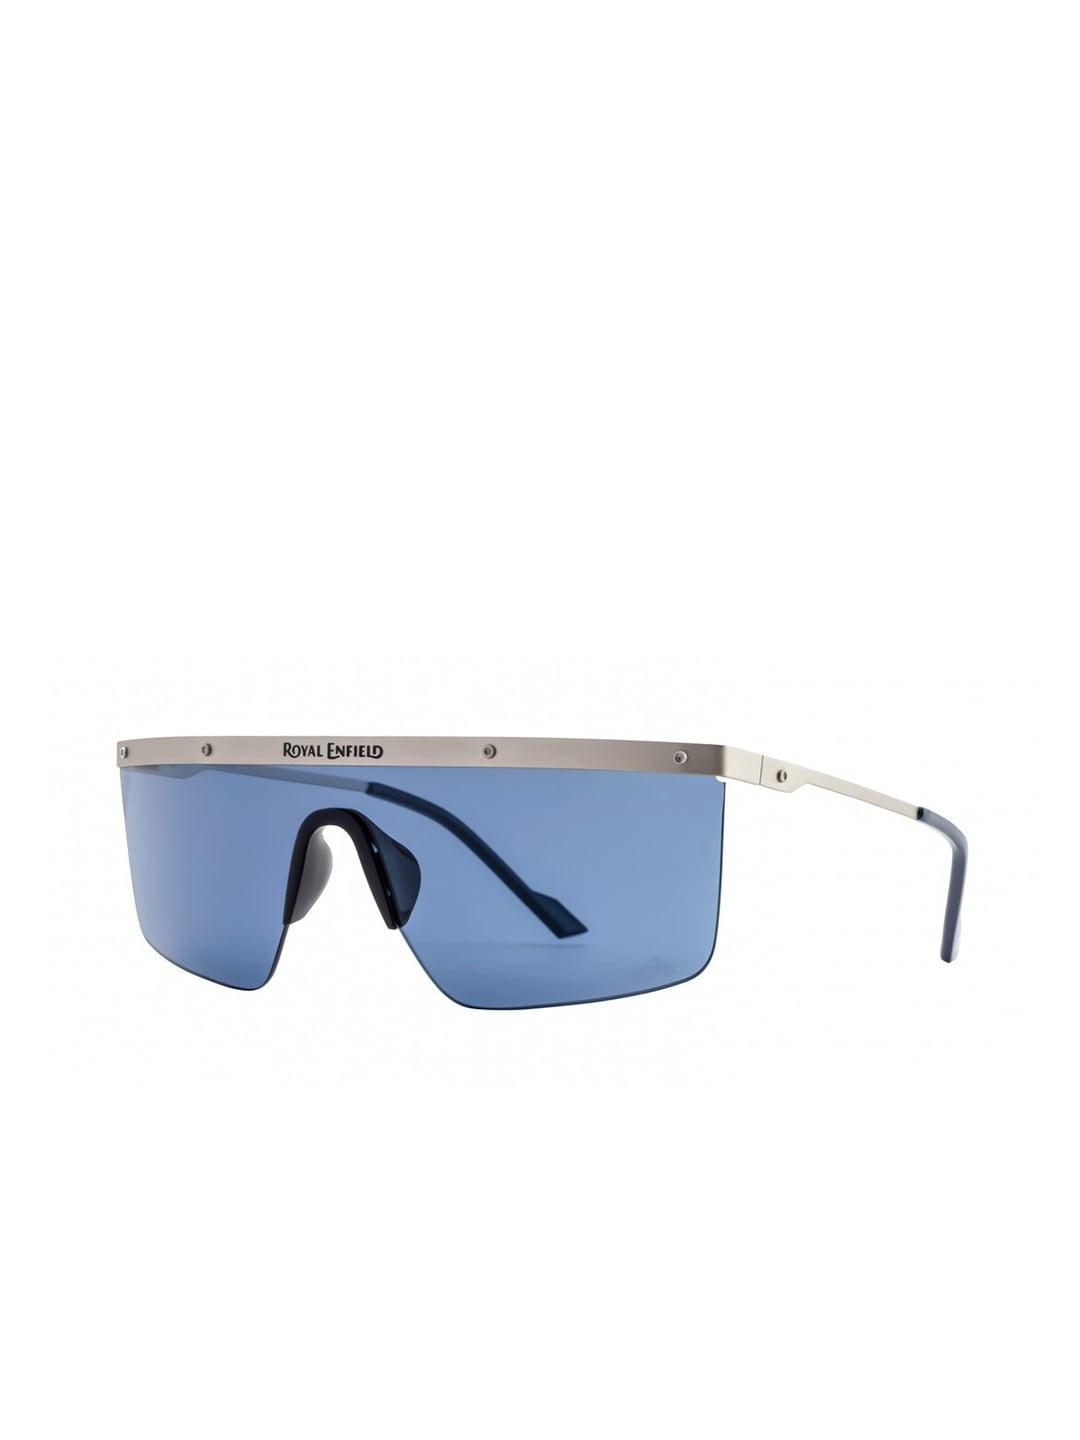 royal enfield men shield sunglasses with uv protected lens re-20004-c03